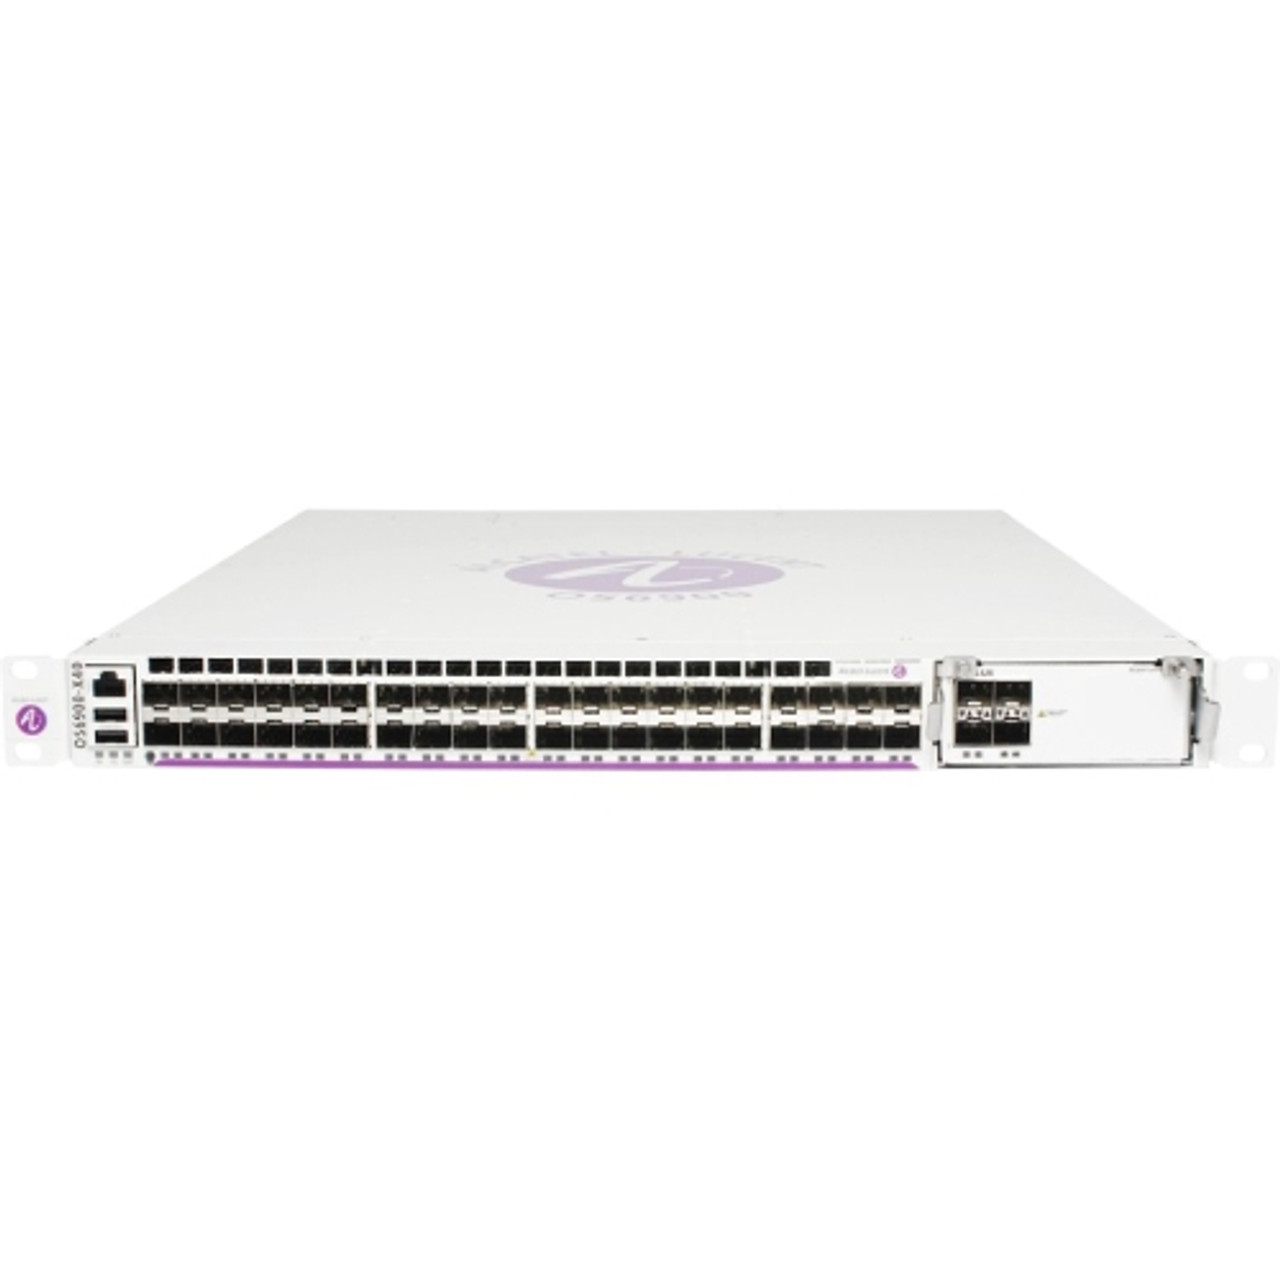 OS6900-X40D-F Alcatel-Lucent OmniSwitch Layer 3 Switch (Refurbished)